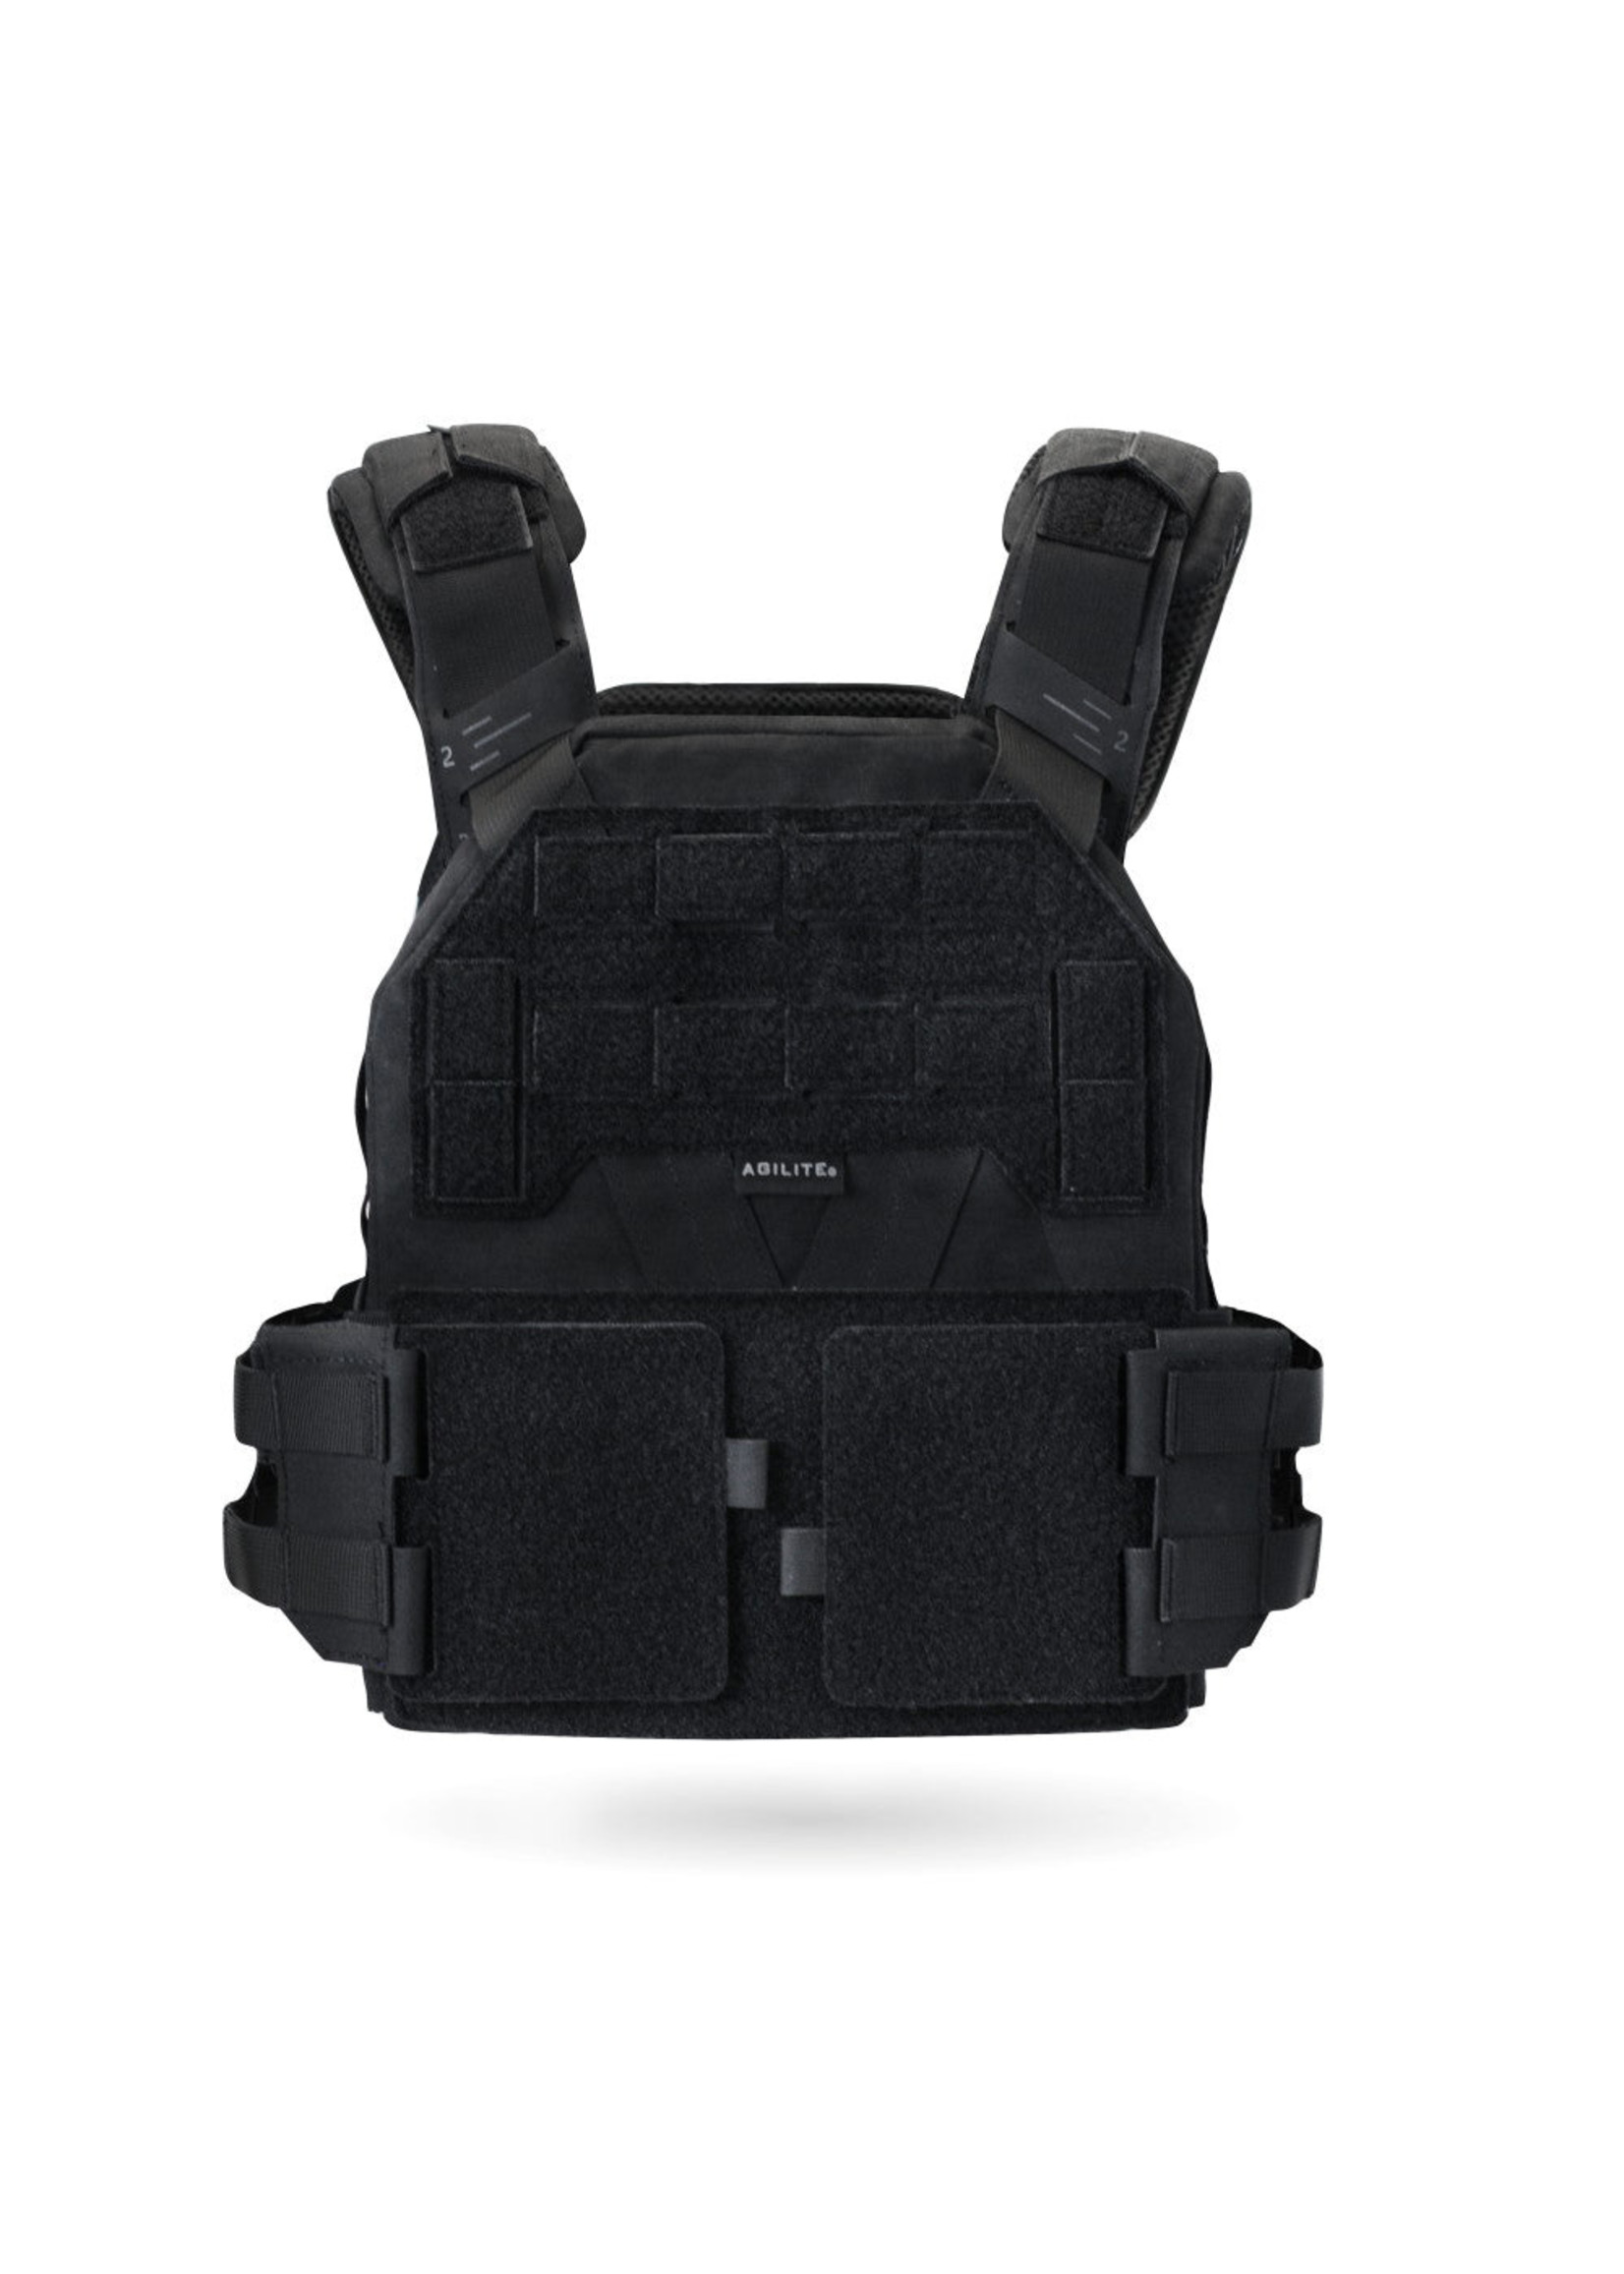 Hanger Pouch for a Plate Carrier - Six Pack™